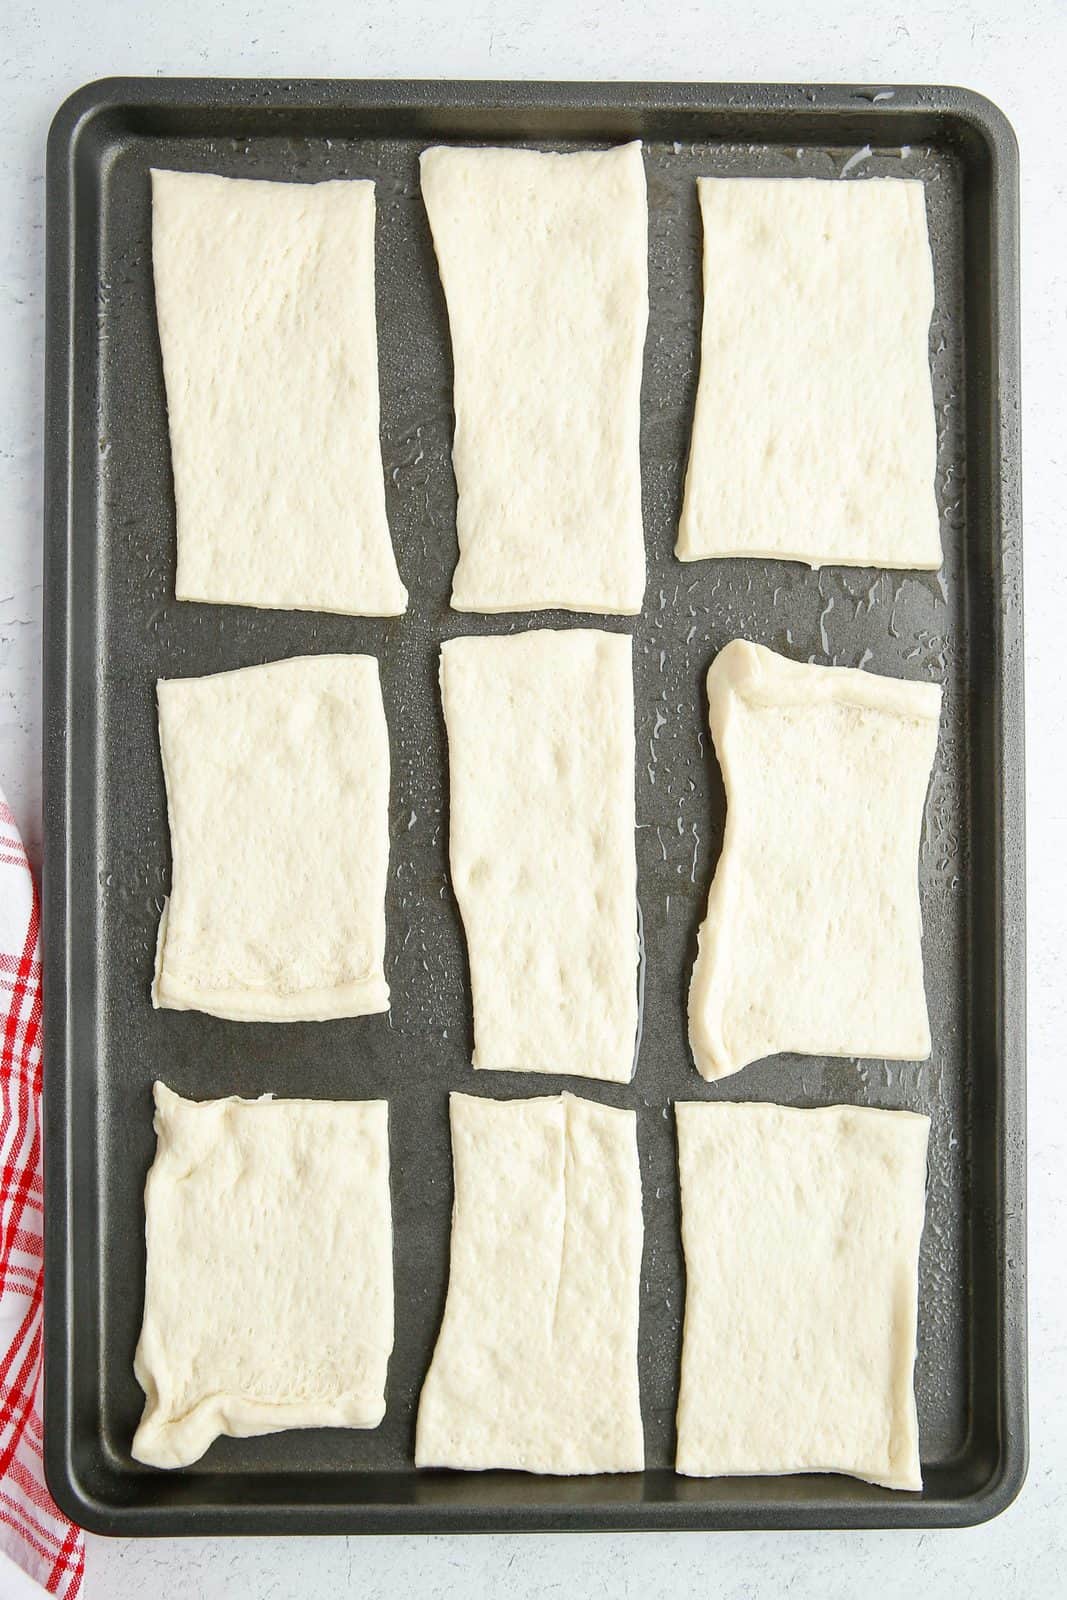 Cut up rectangles of pizza dough on prepared baking sheet.